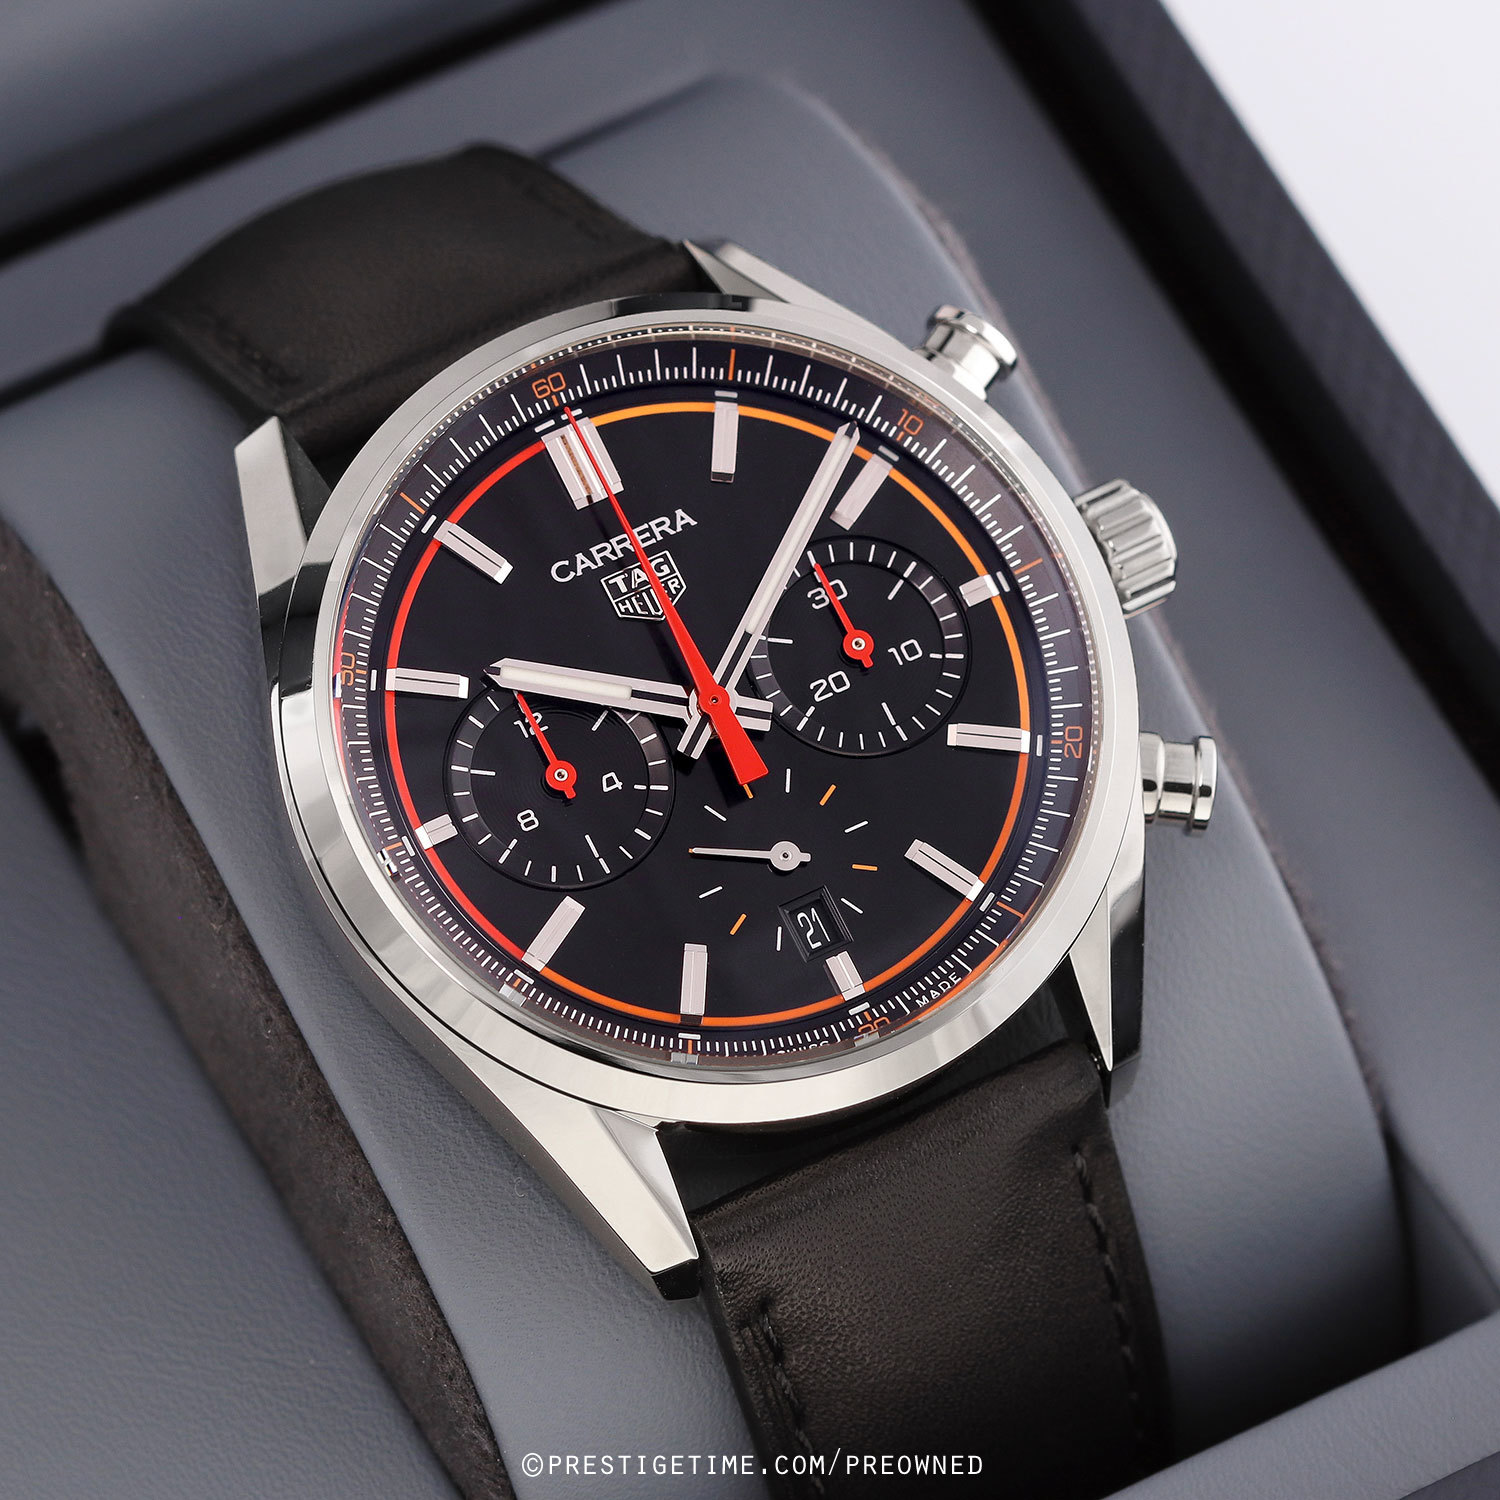 REVIEW: The 2020 TAG Heuer Carrera Chronograph 42mm Calibre Heuer 02 